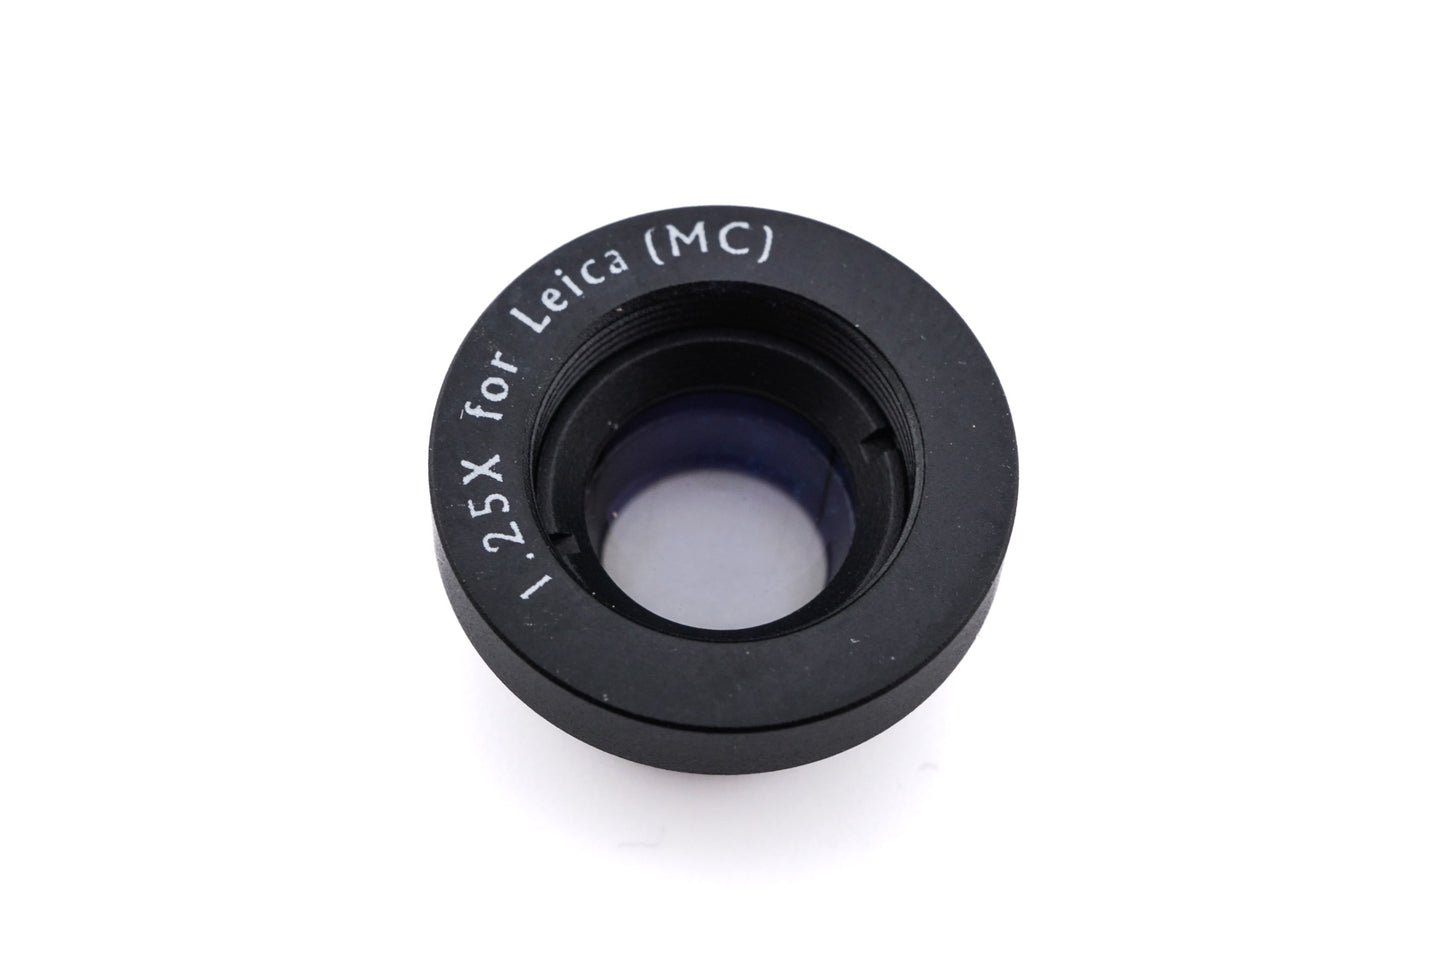 Generic 1.25x Viewfinder Magnifier for Leica - Accessory